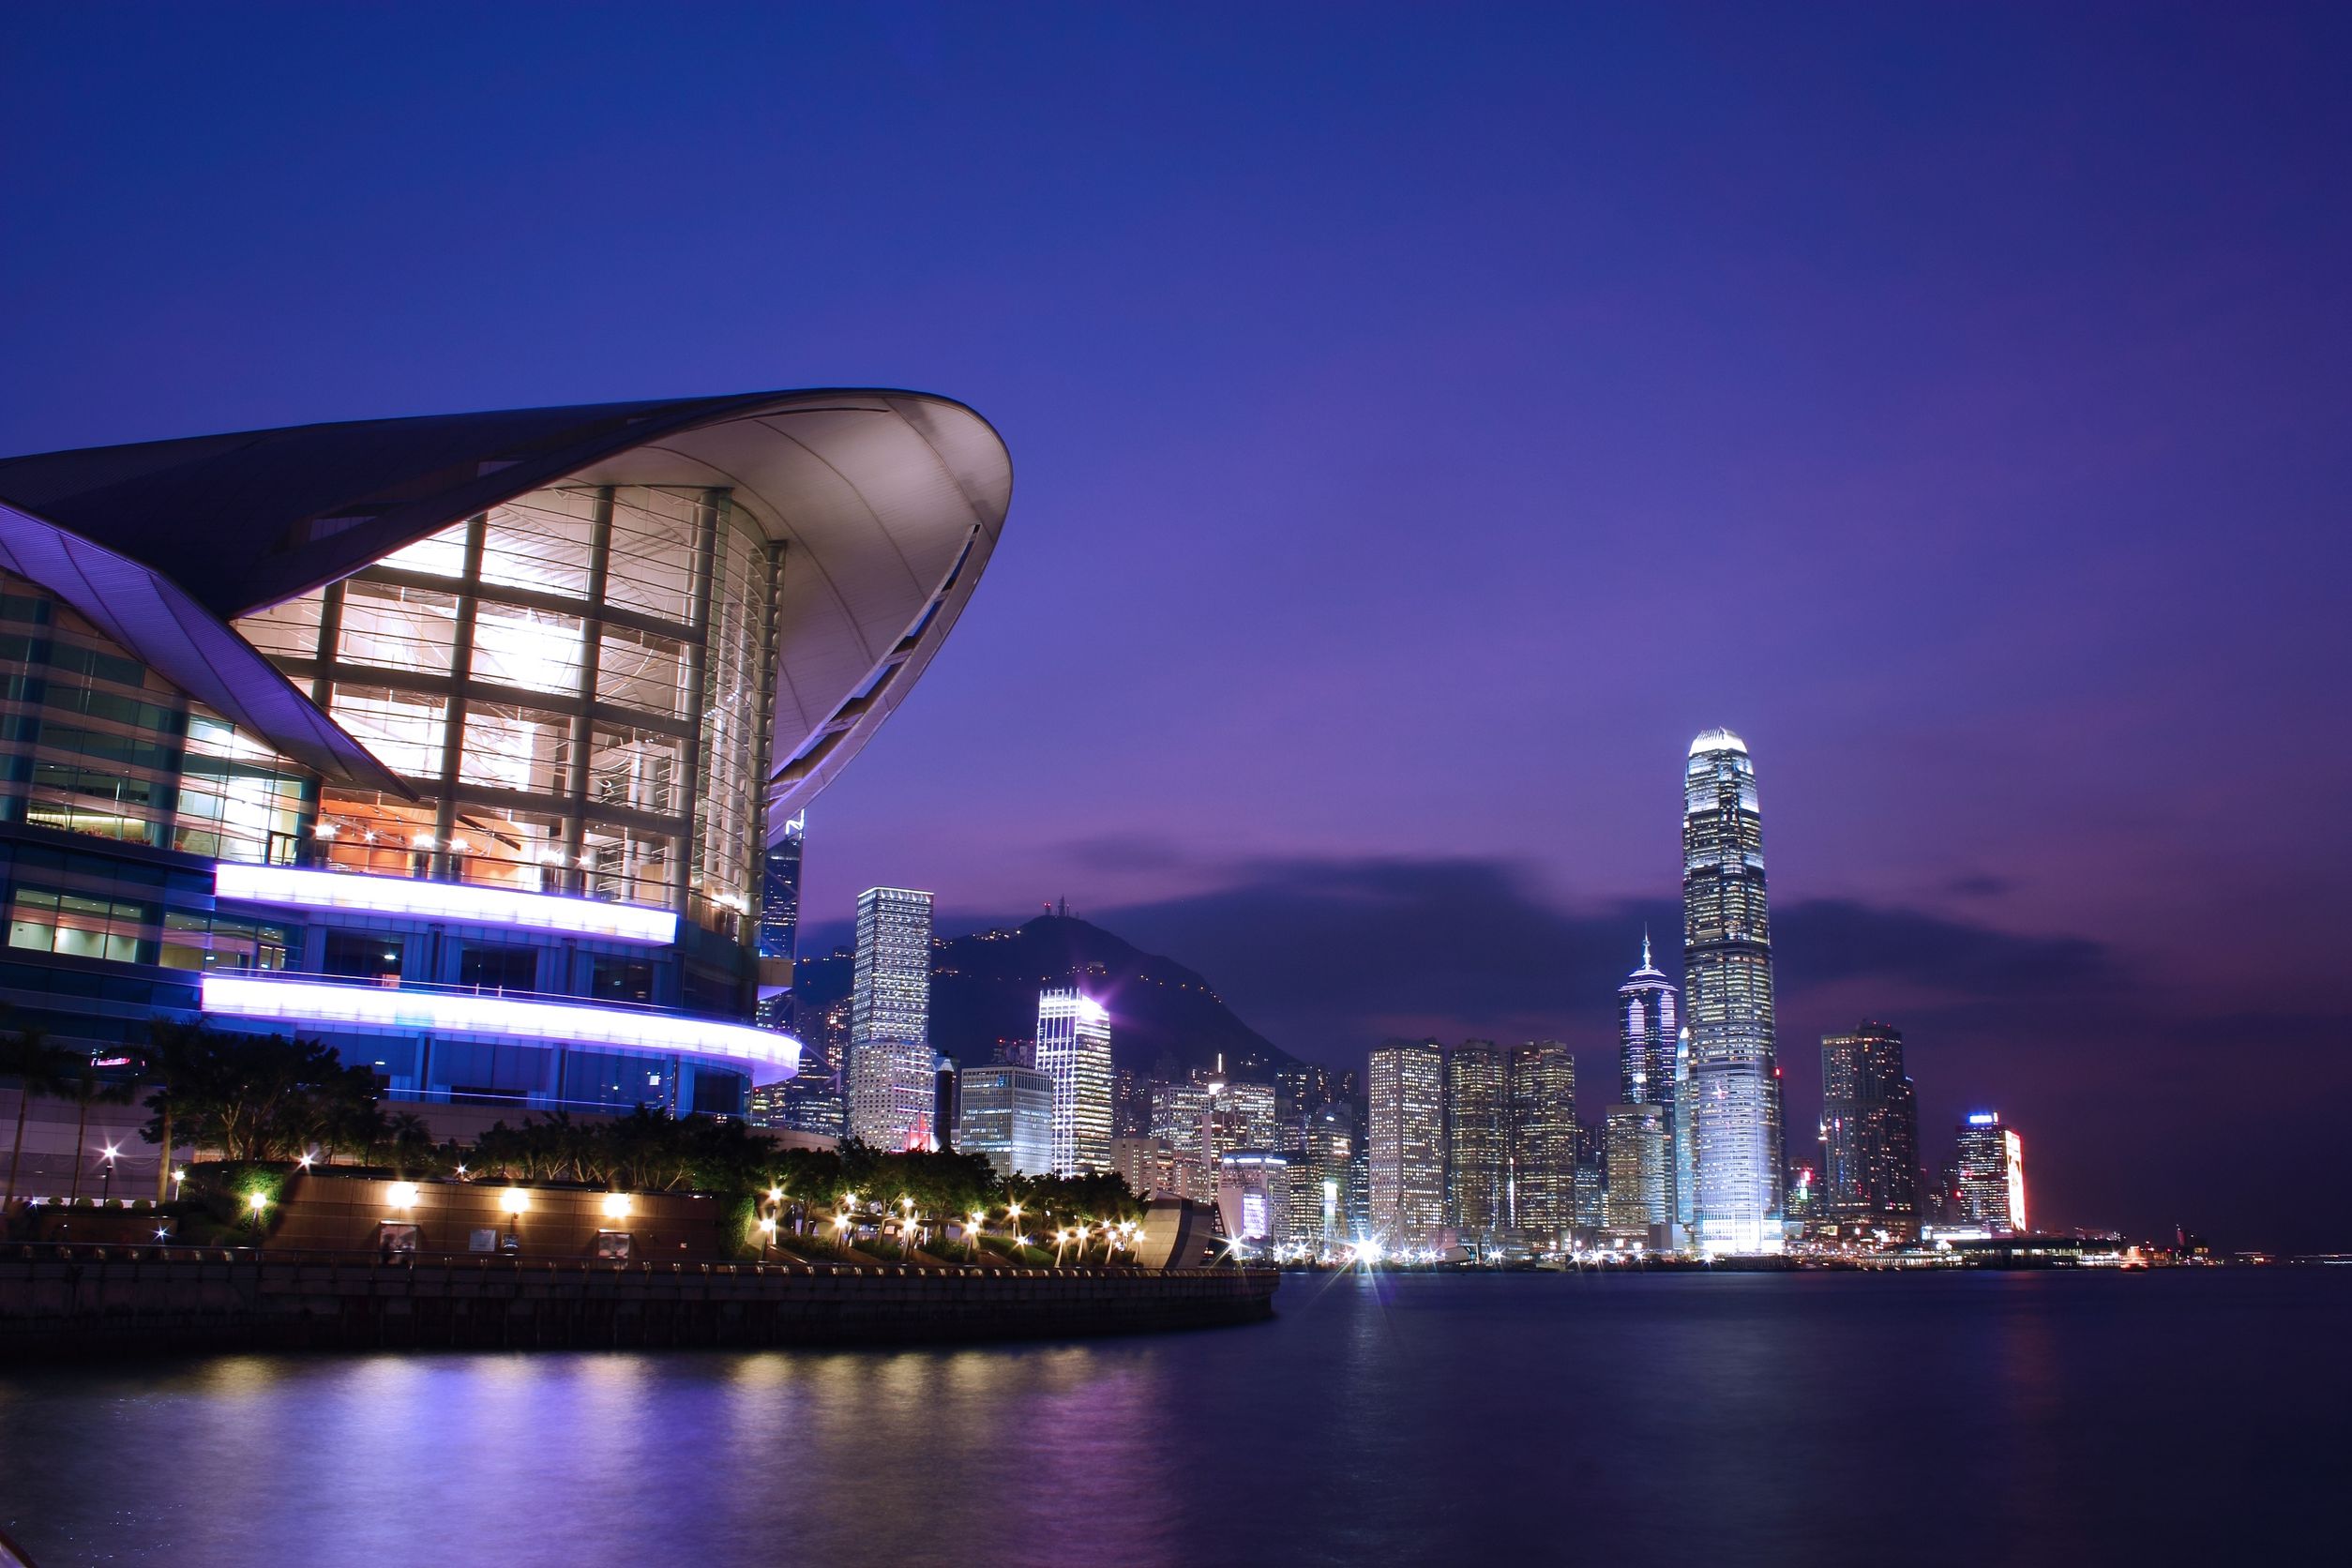 Hong Kong Playing A Leading Role In Advancing The Cyber Security Industry In Asia.